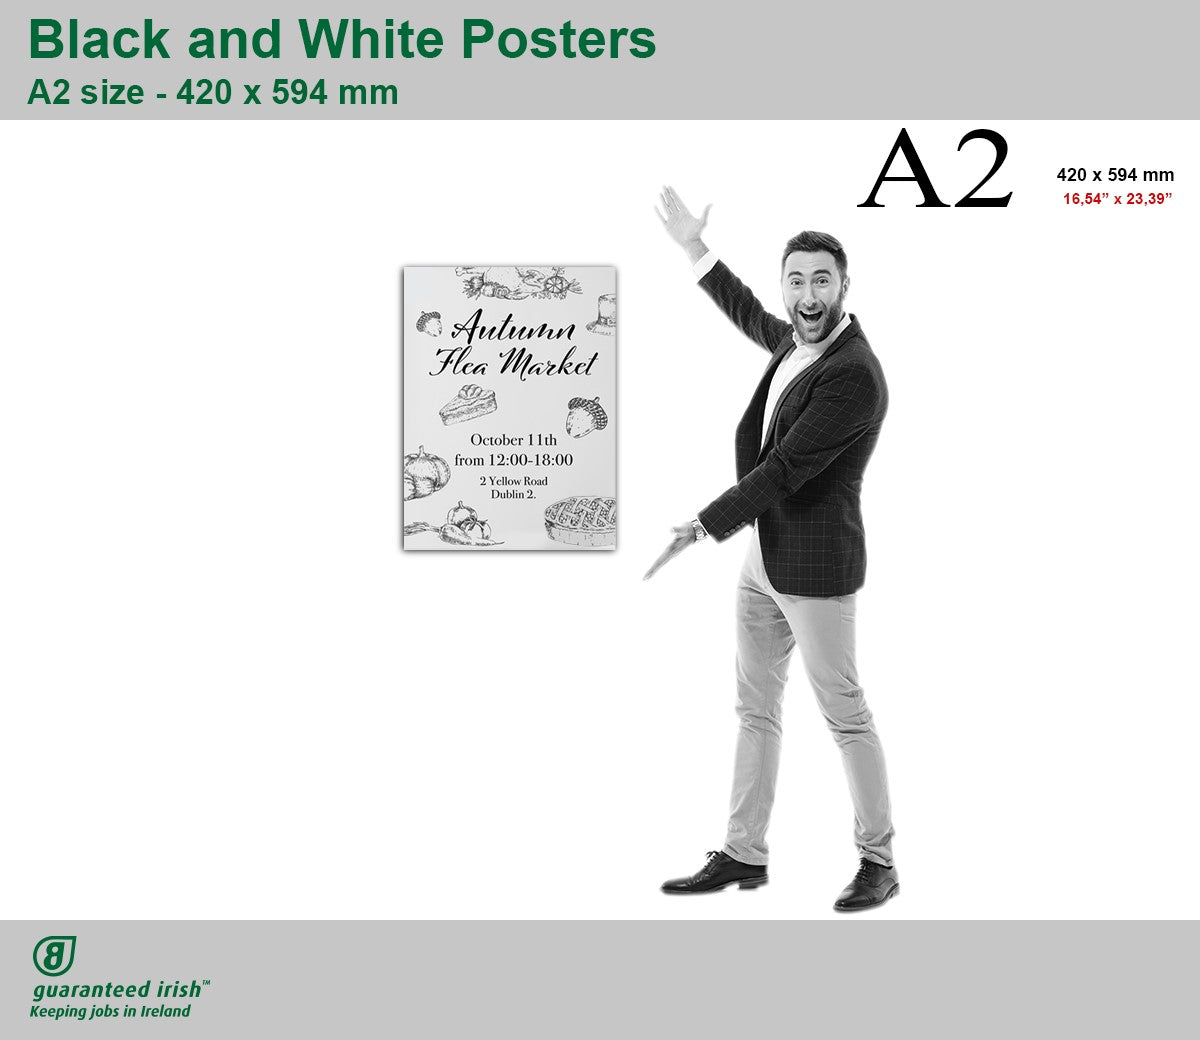 Black and White Posters A2